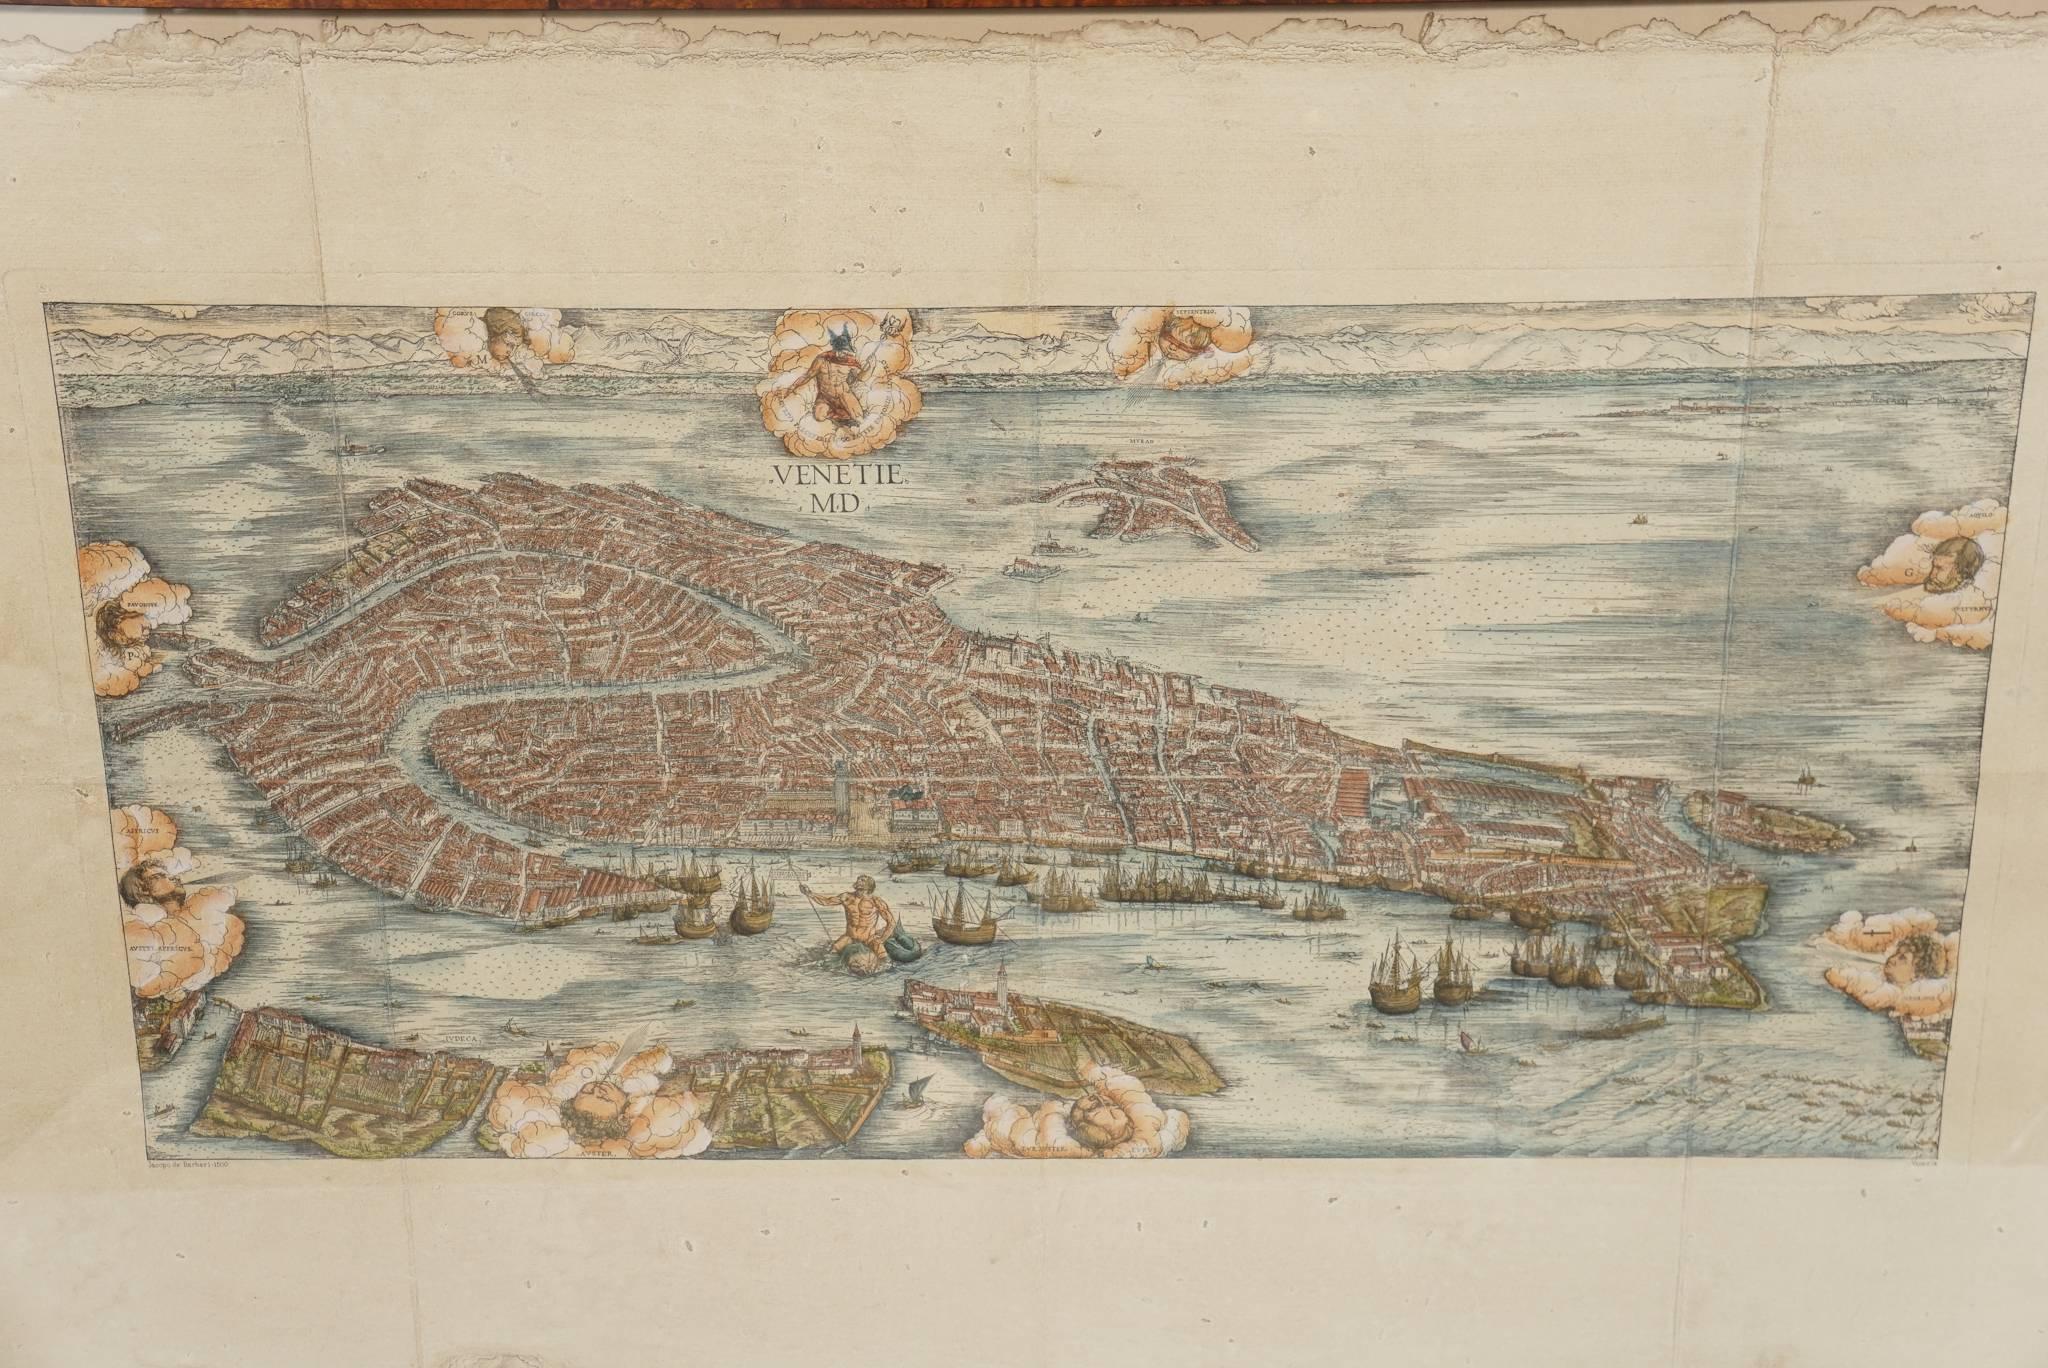 This lively and colorfully engraving of Venice is hand water colored. This printing is a late 18th century version newly framed with exposed margins showing the papers edge and plate marks. This map, famous from its first publication in 1500, is one